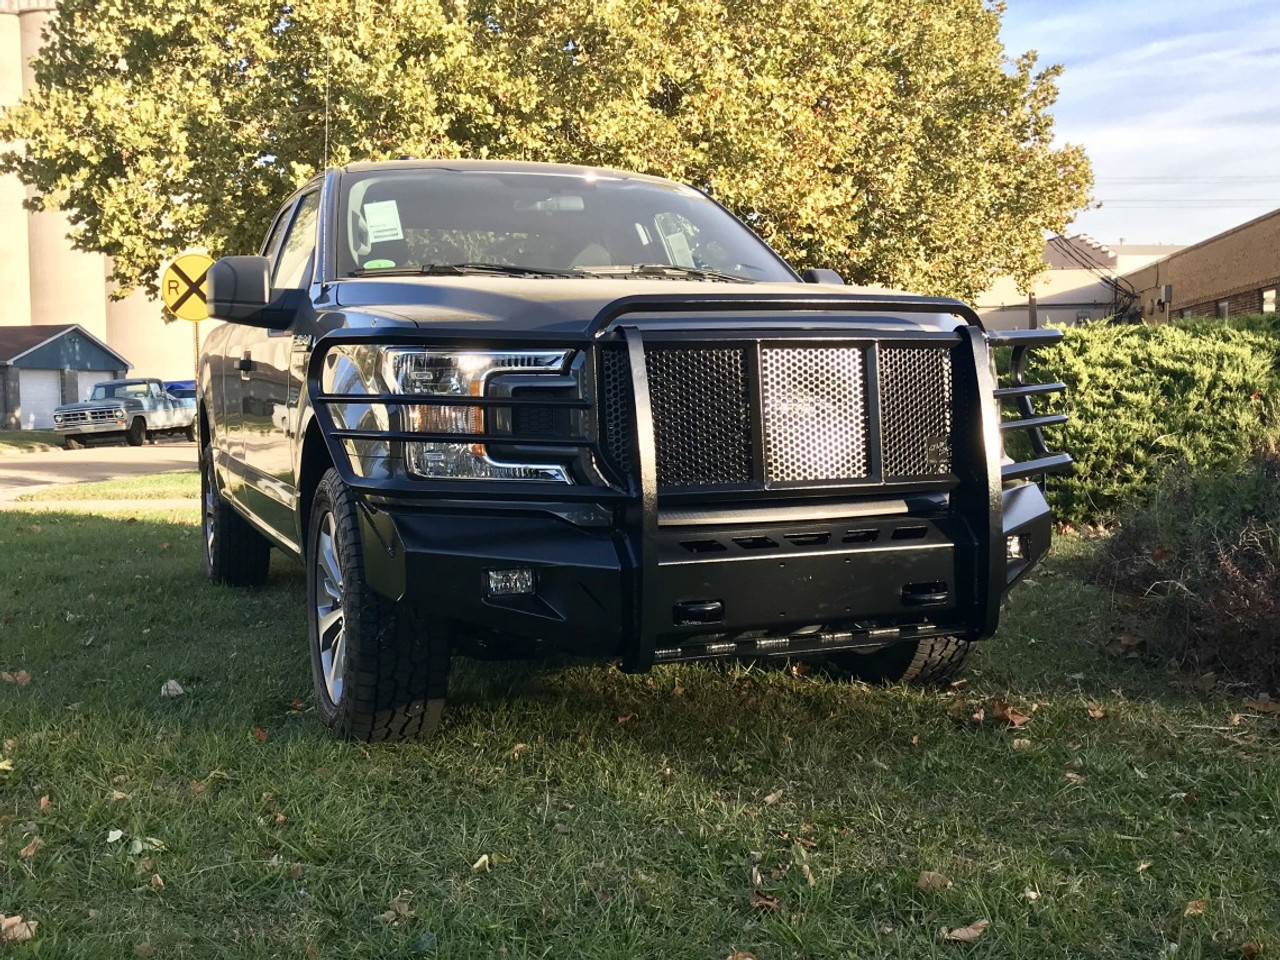 Thunder Struck FLD18-200 Elite Series Bumper For Ford F-150 2018-2020 Adaptive Cruise Sensors and Front Camera Option Available